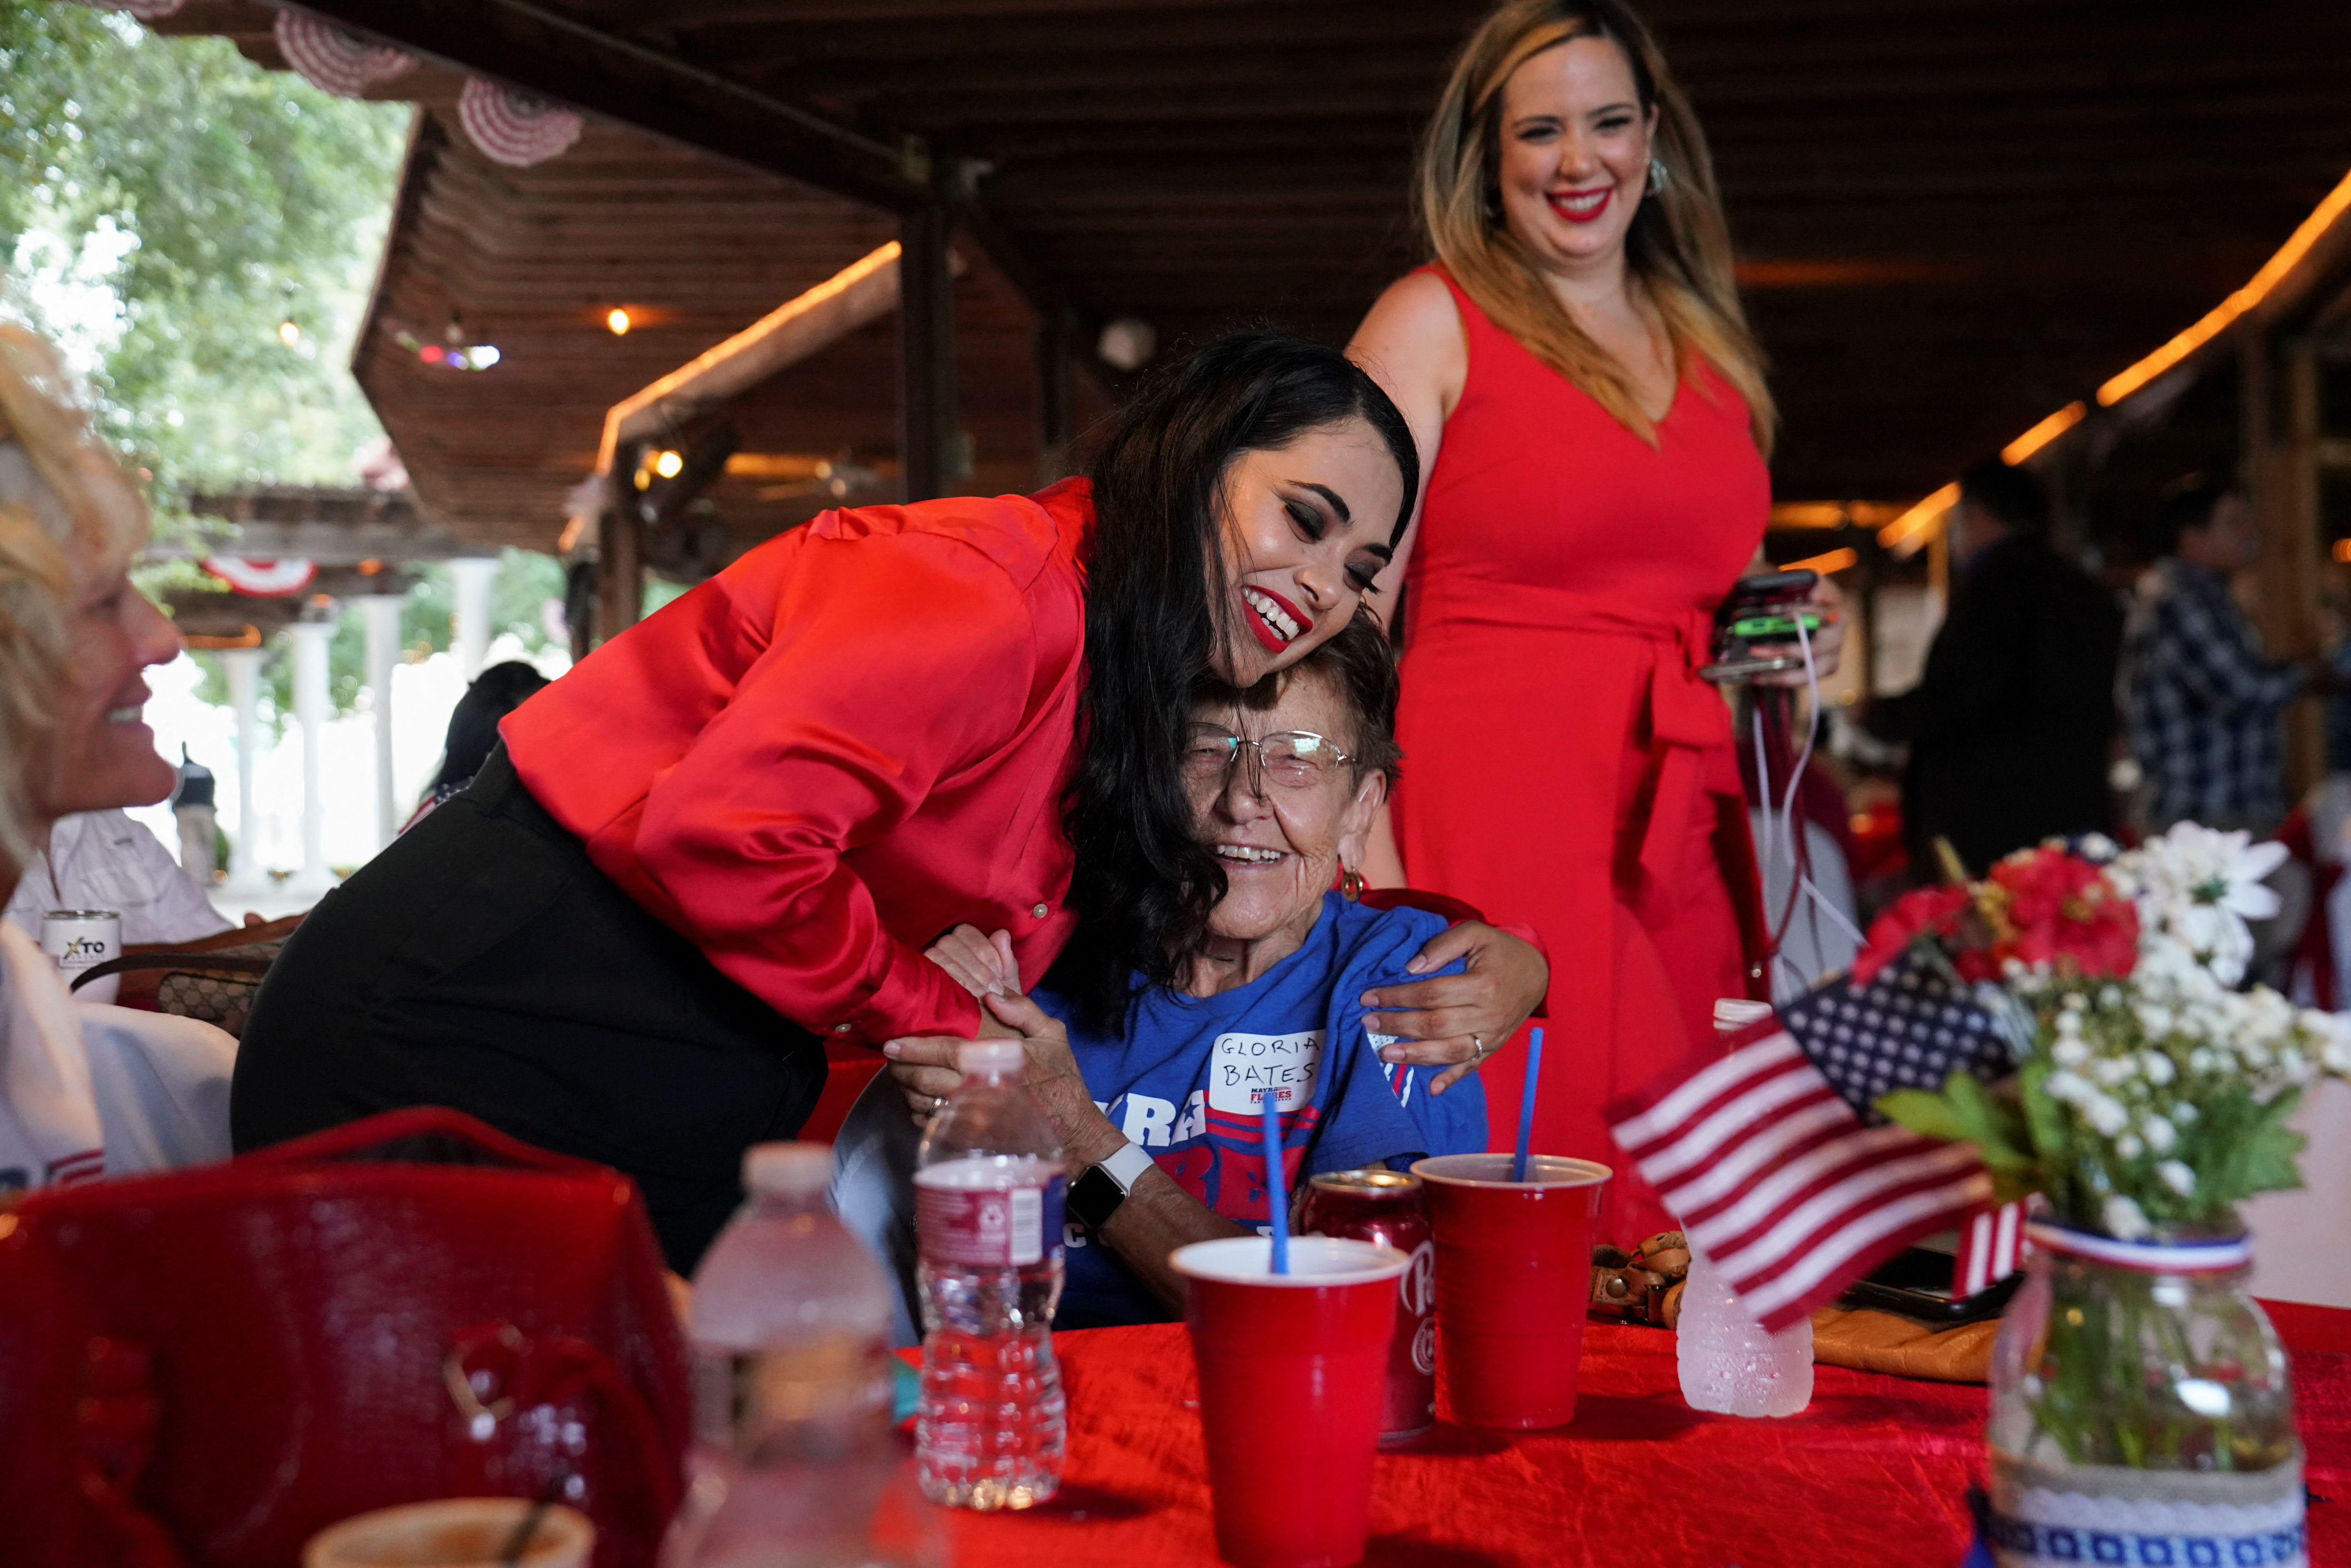 Republican Mayra Flores, who is running for the vacant 34th congressional district seat, is greeted by a woman during her watch party in San Benito, Texas, U.S., June 14, 2022. REUTERS/Veronica G. Cardenas